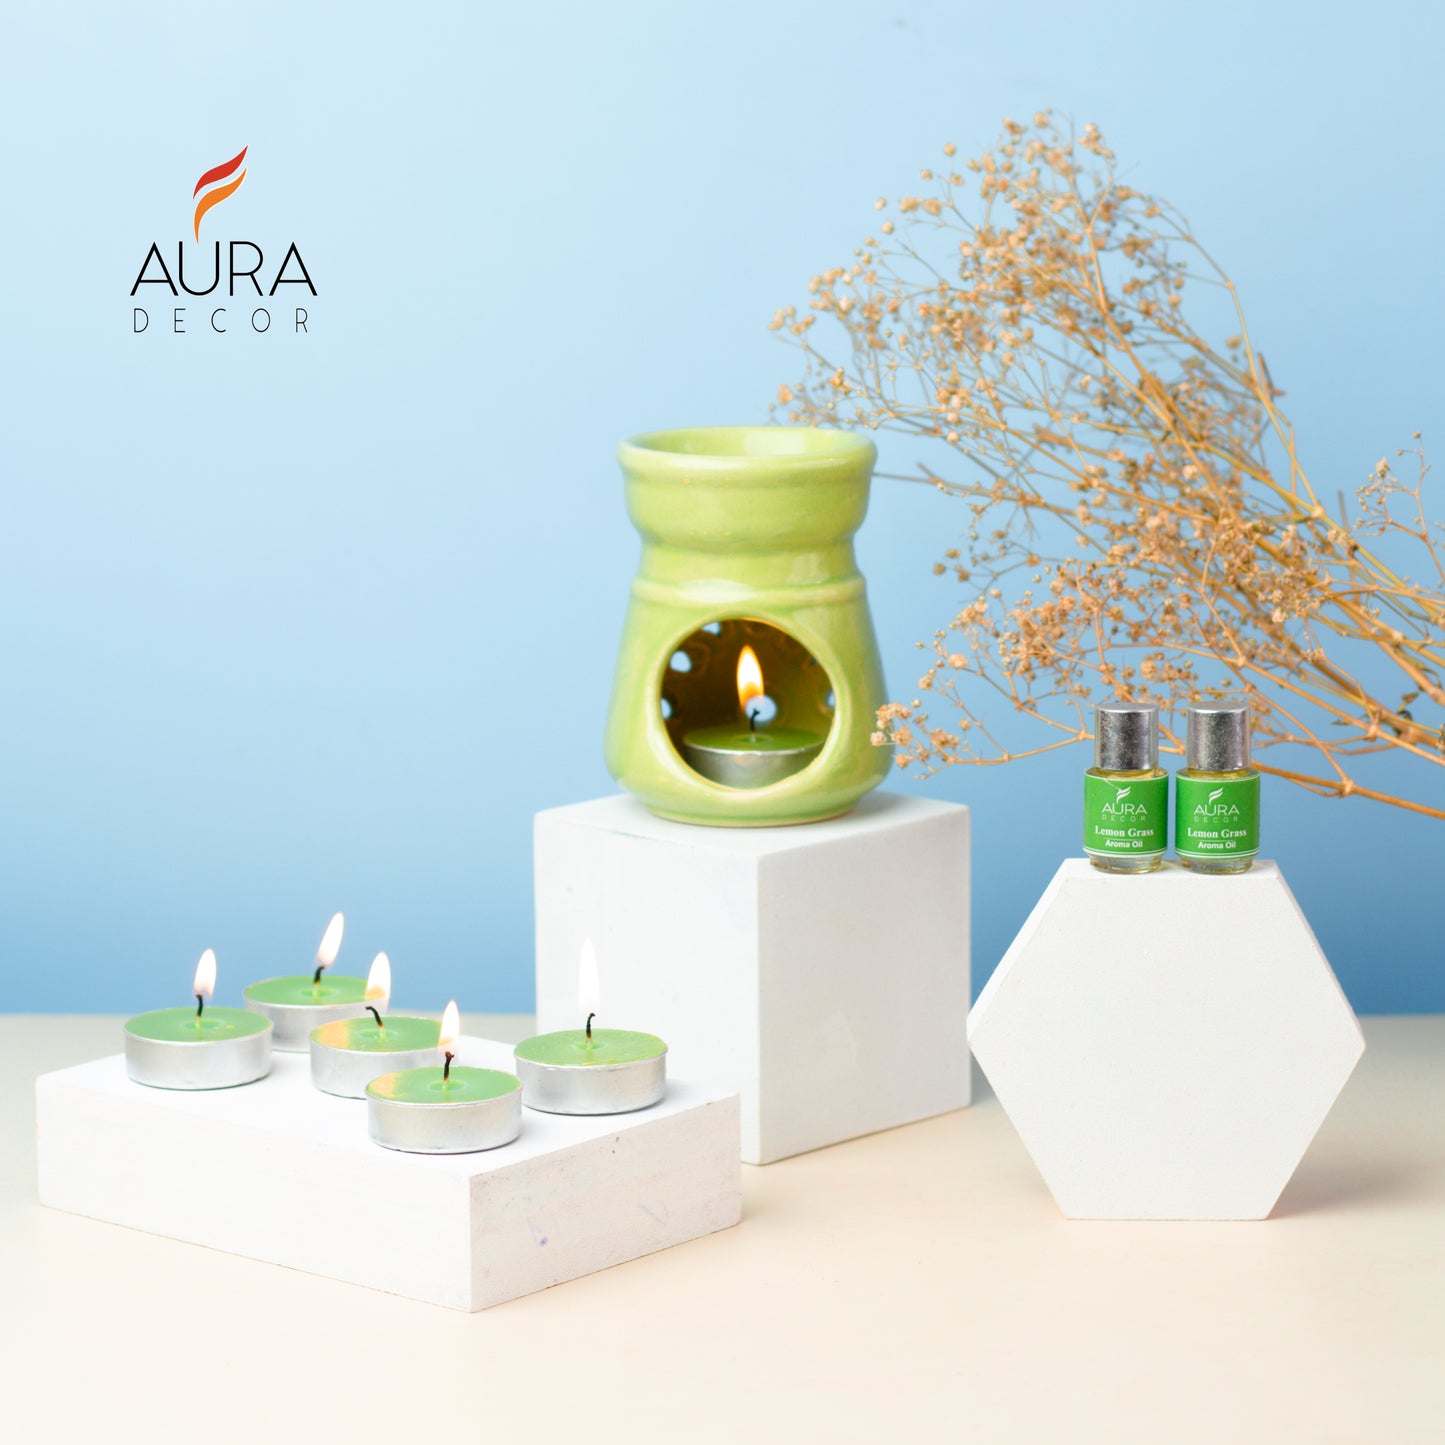 AuraDecor Aromatherapy Diffuser Gift Set with 6 Tealights (GS-09)